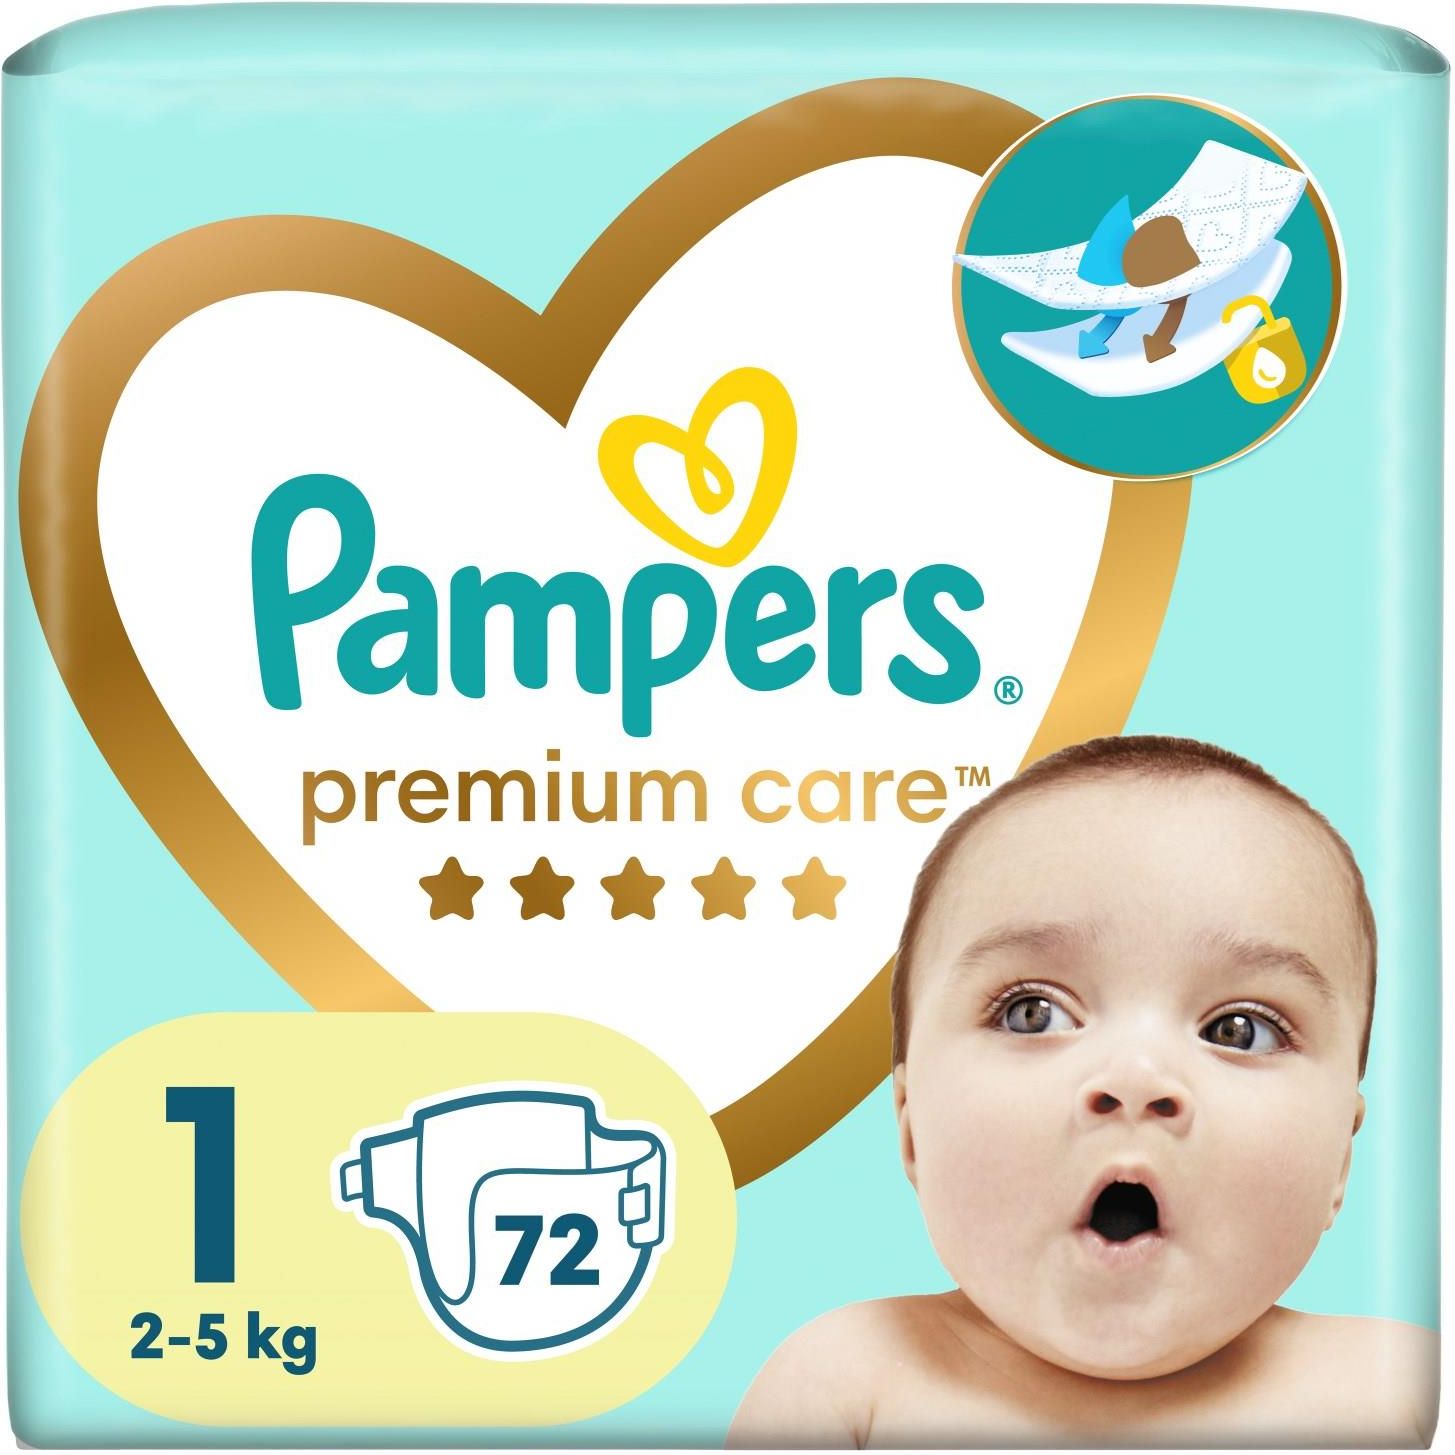 pampers 2 94 szt